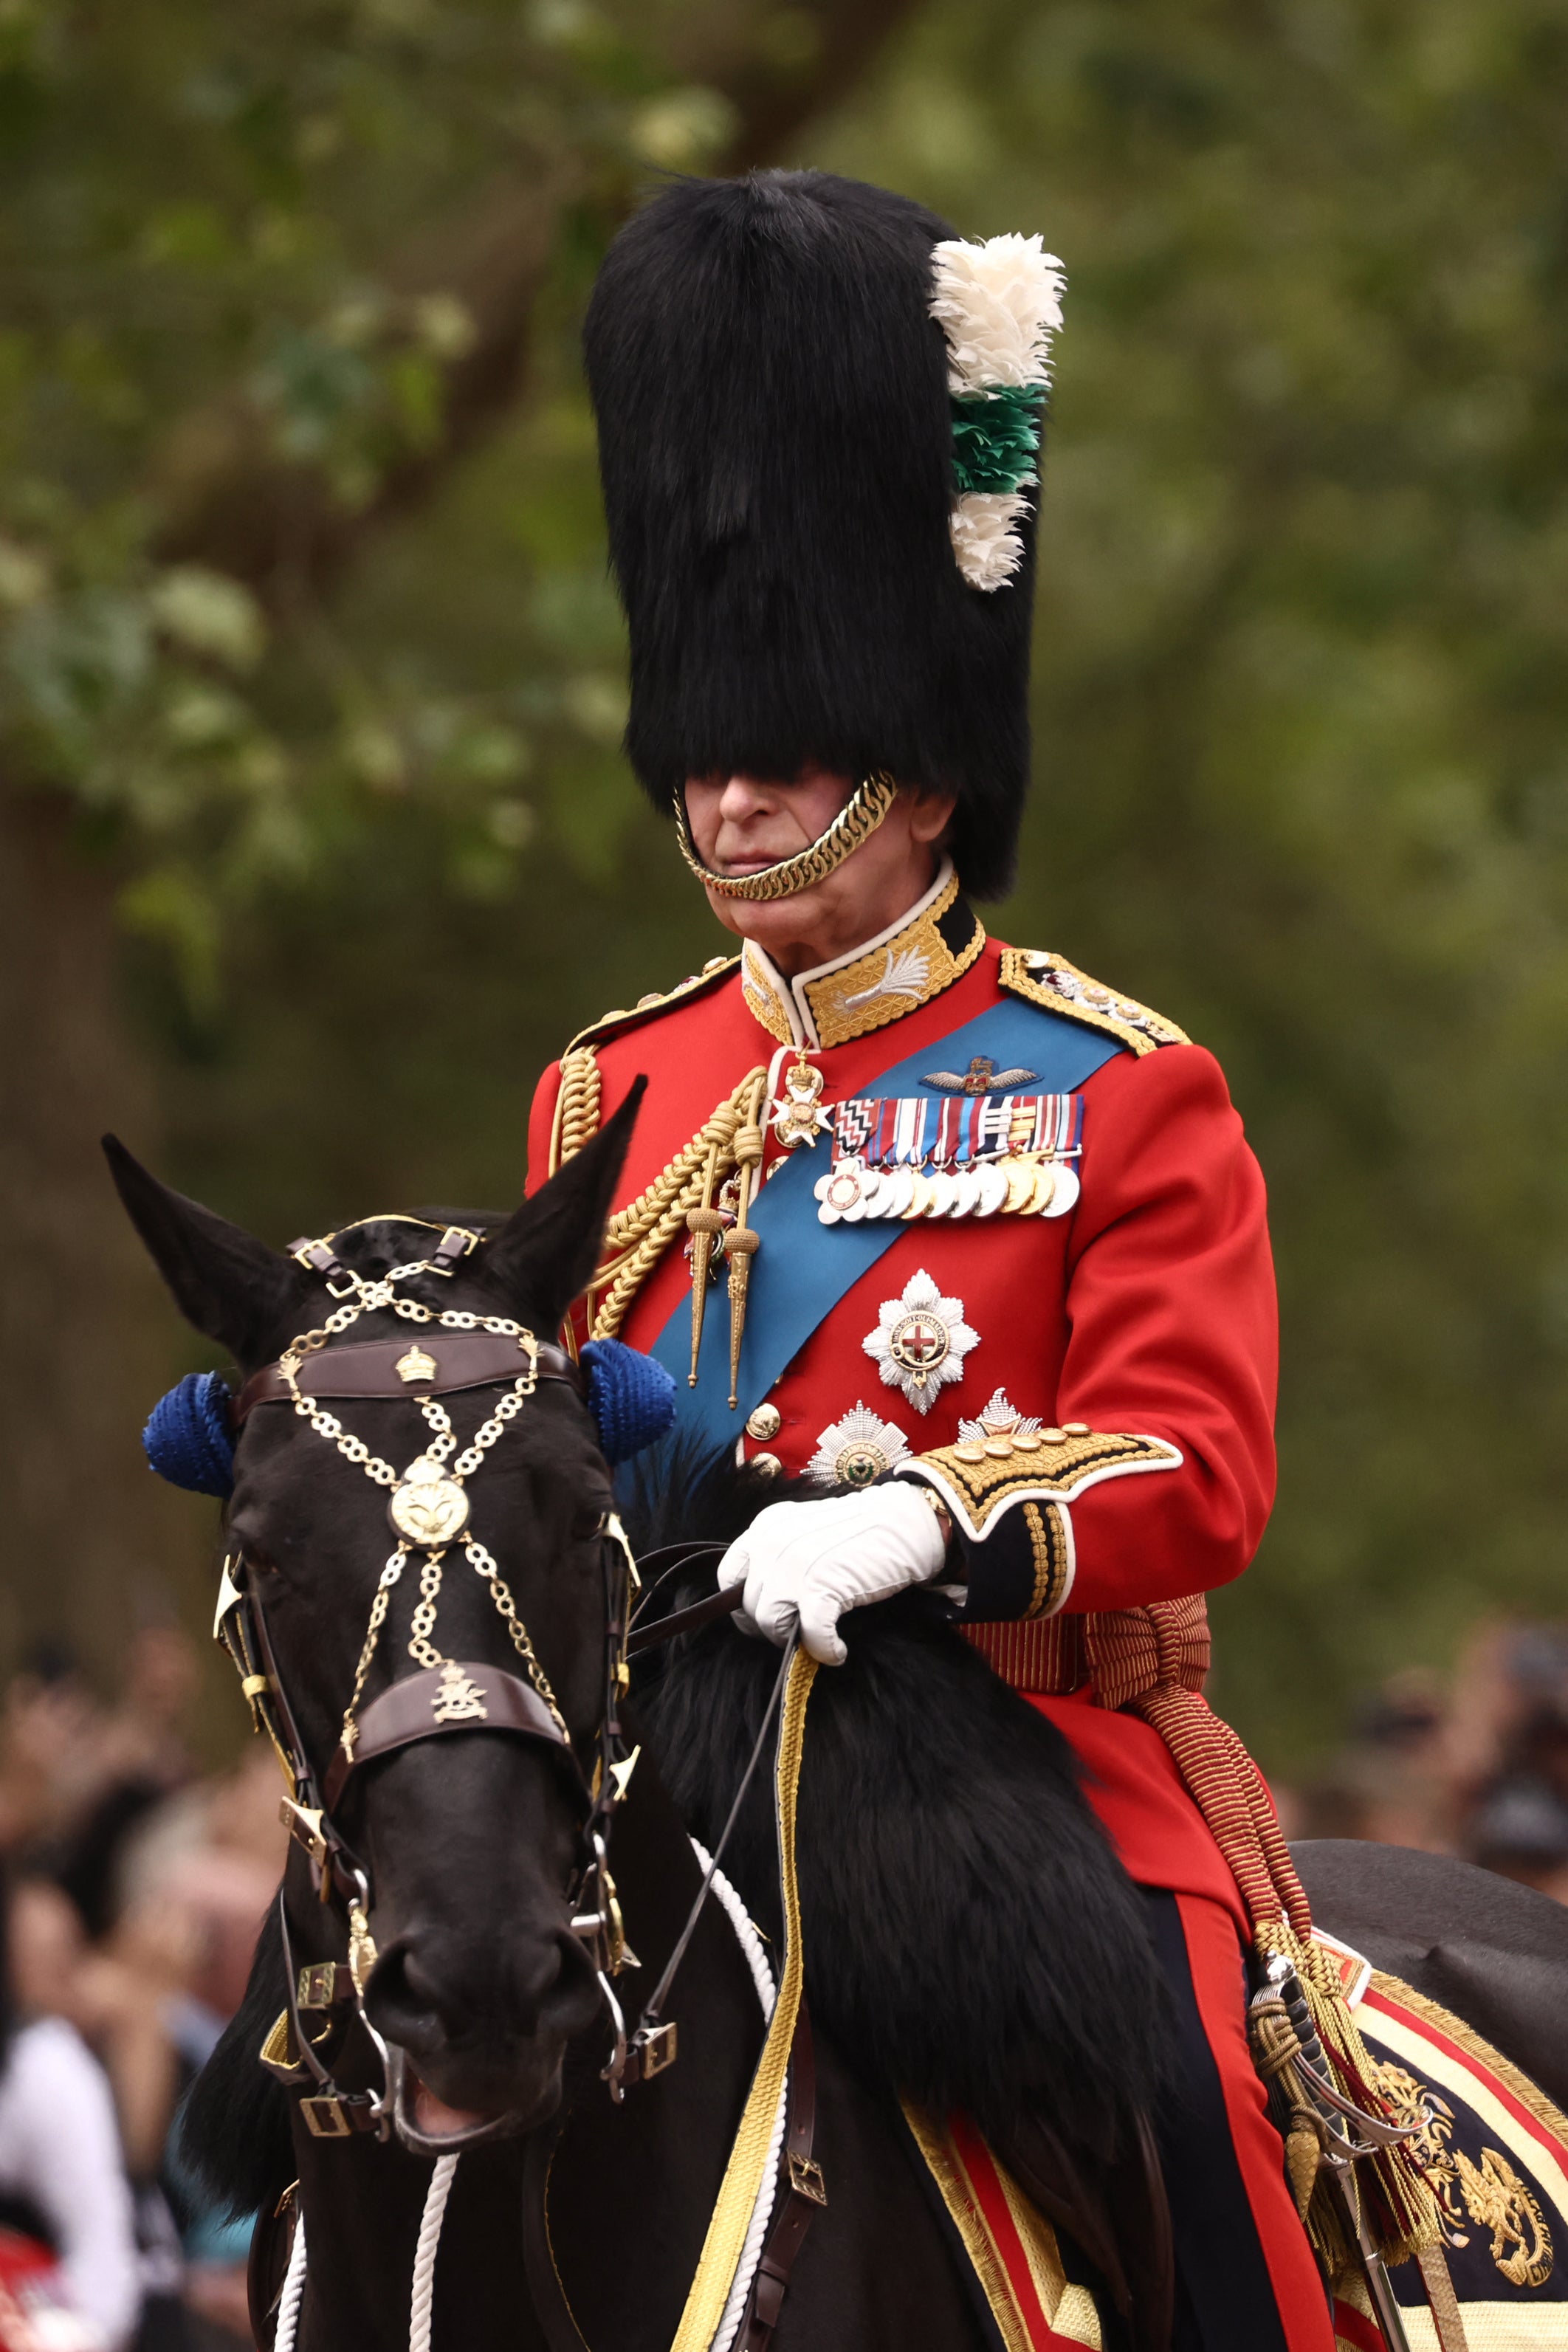 King Charles will inspect the soldiers from a carriage rather than horseback this year